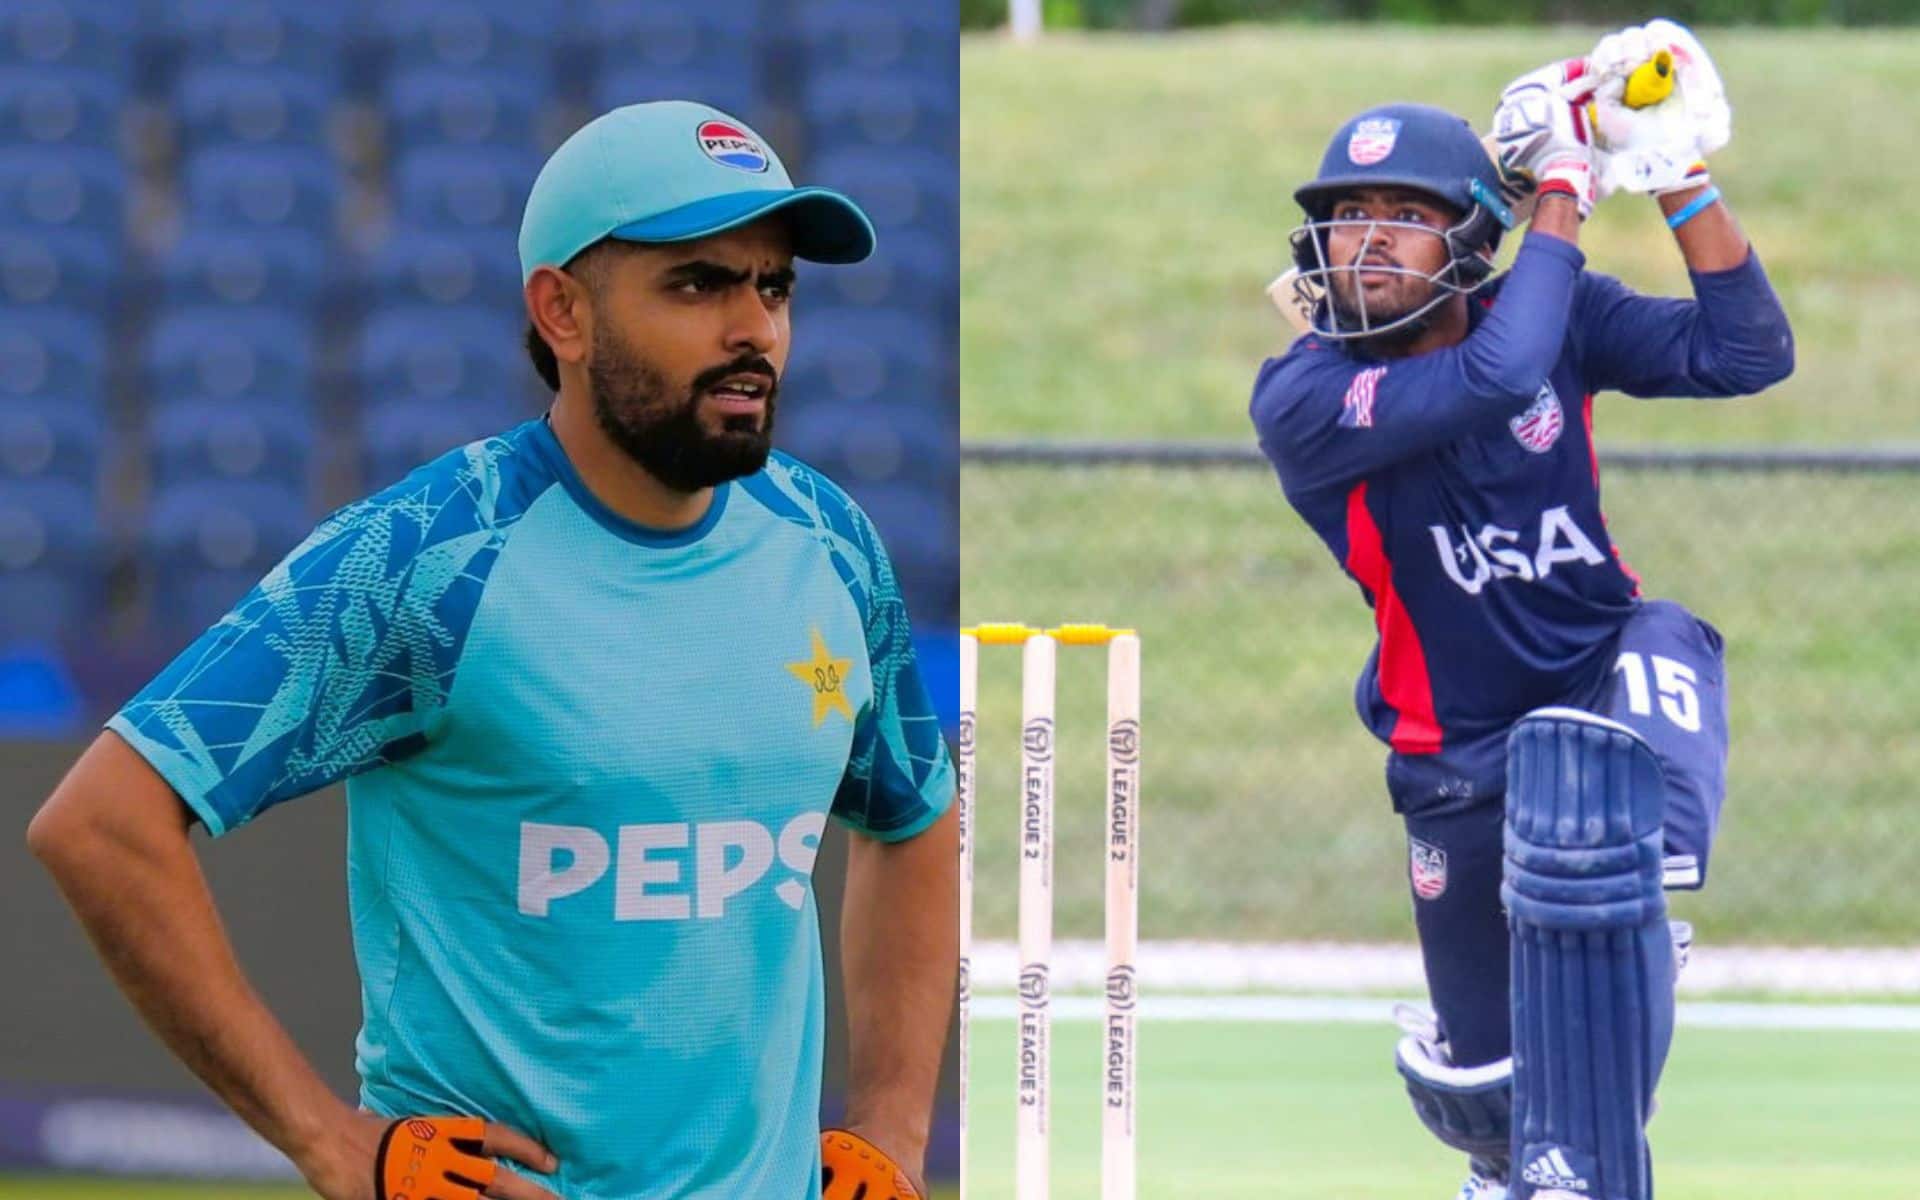 Babar Azam and Monank Patel will be leading their team in the match [X]